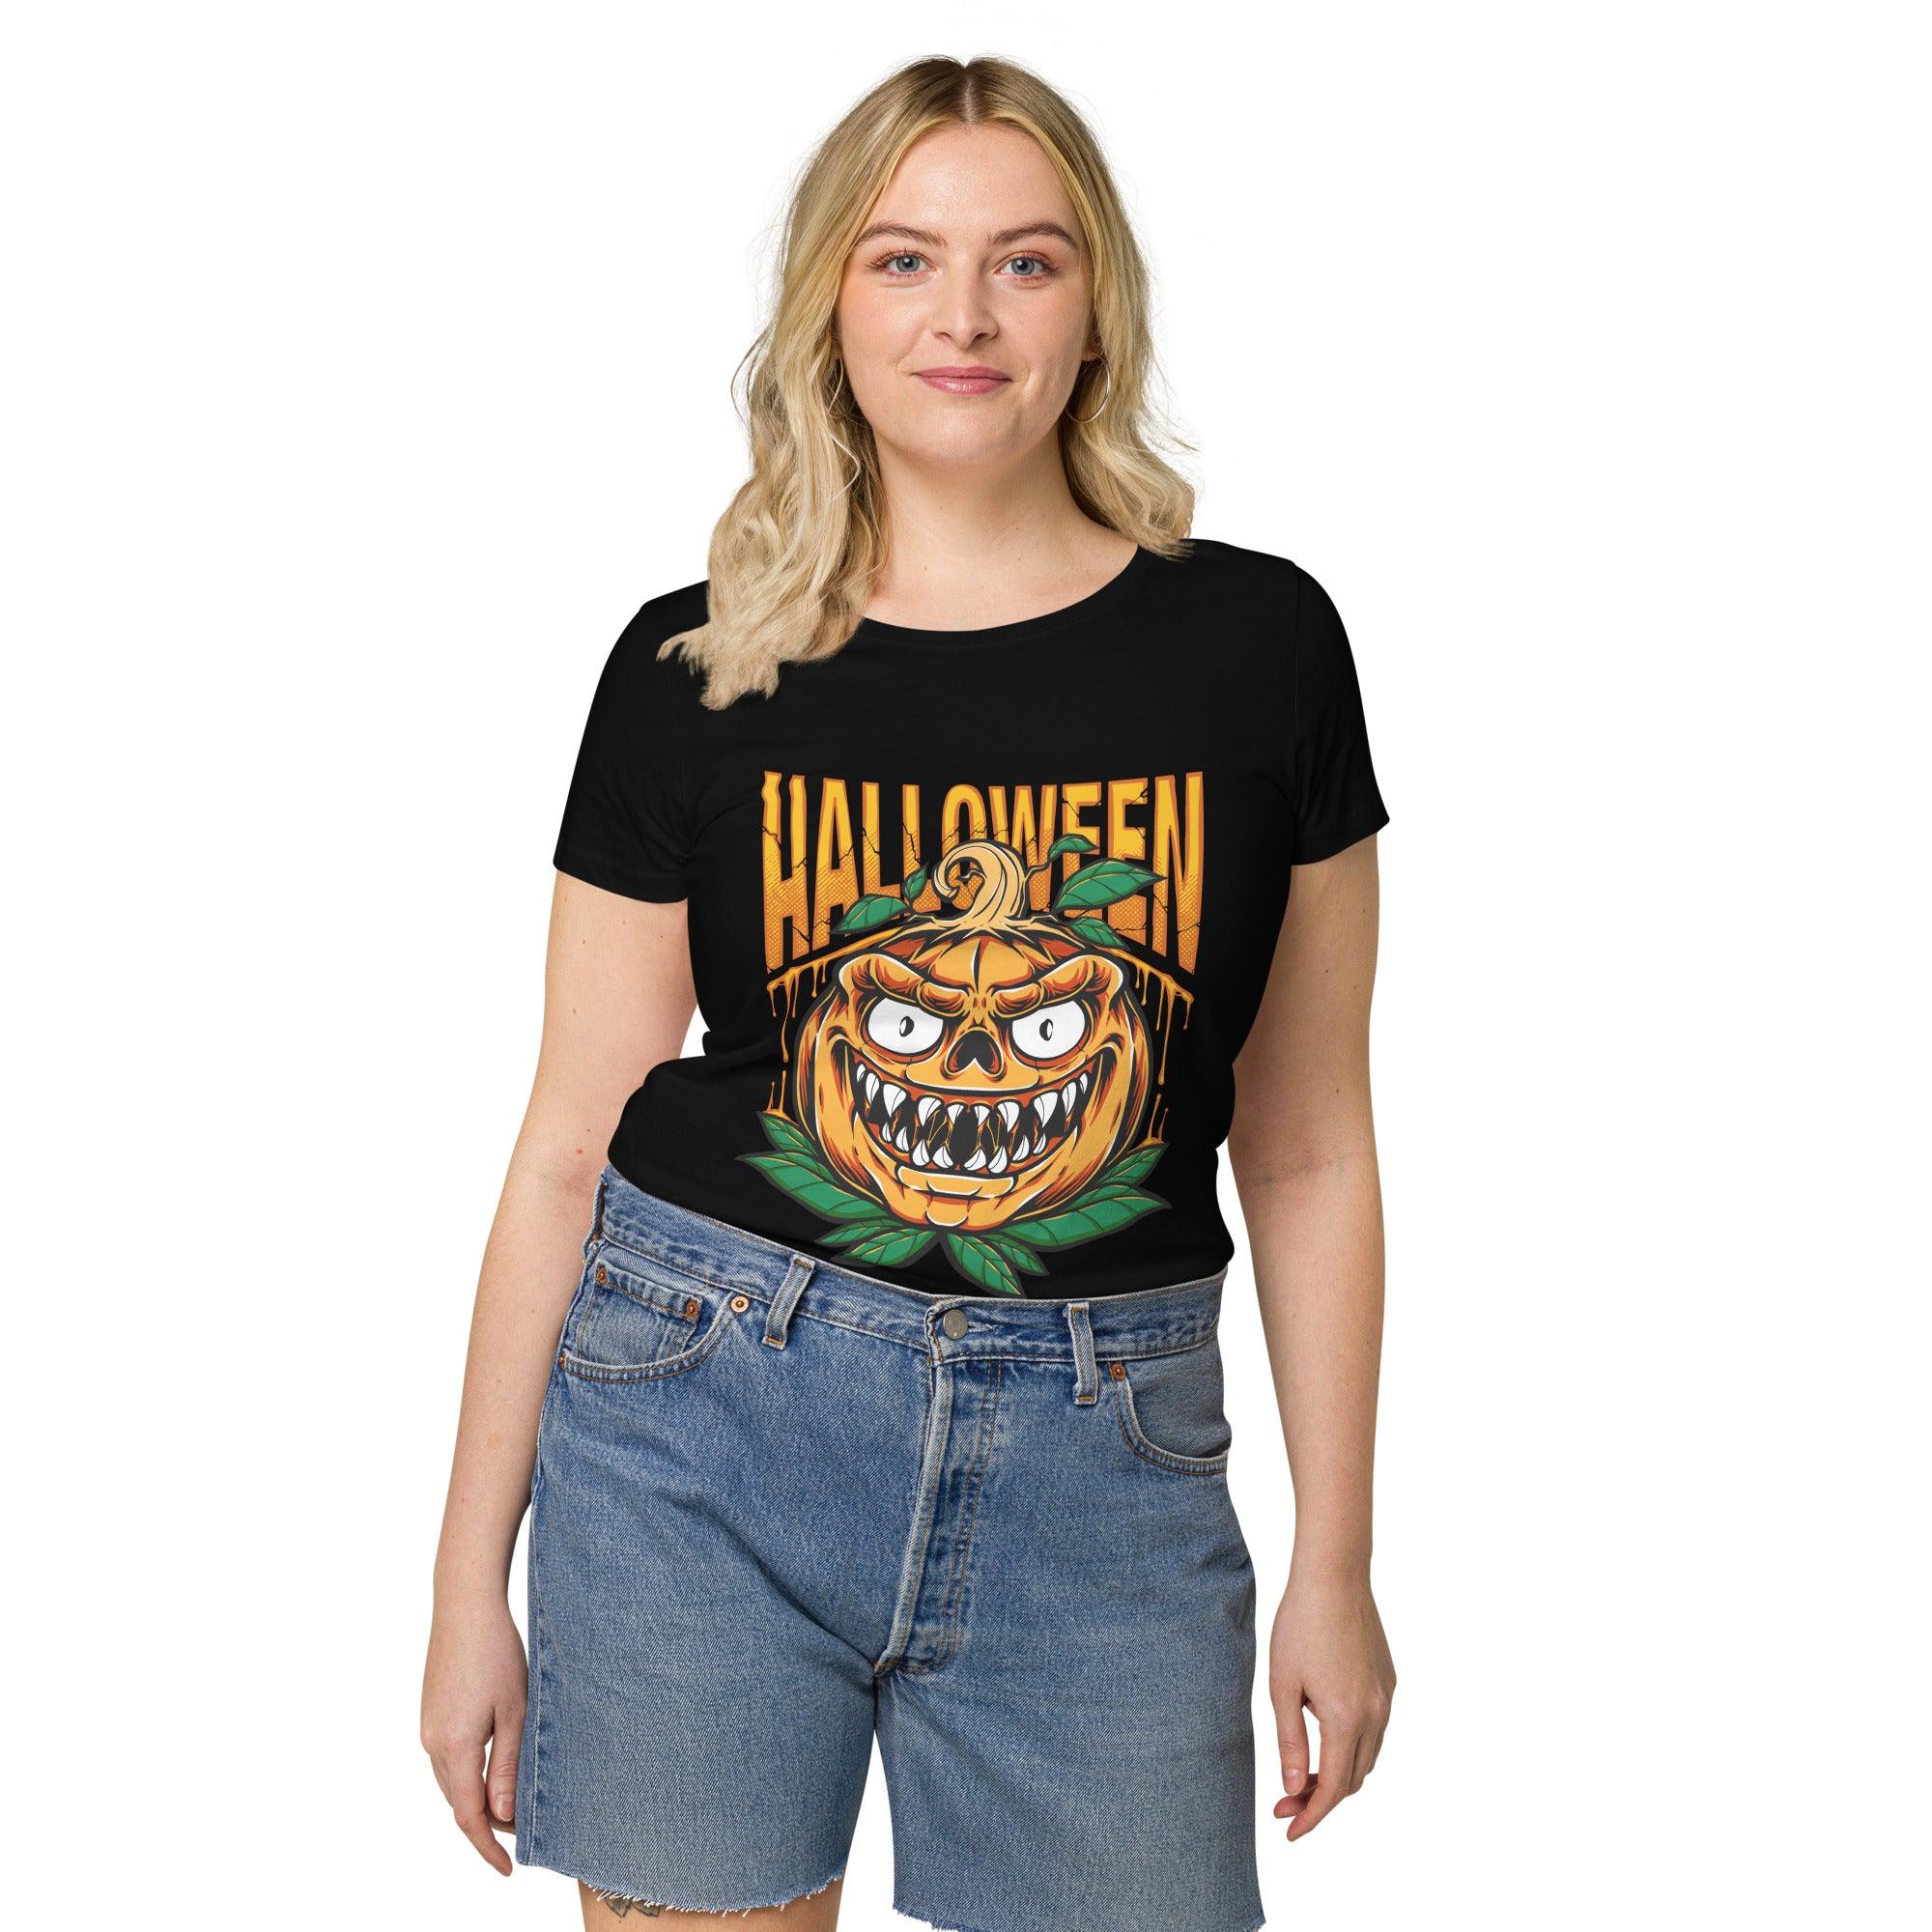 Women's Organic Halloween Tee styled for a casual Halloween party, showcasing its versatility and sustainable fashion statement.